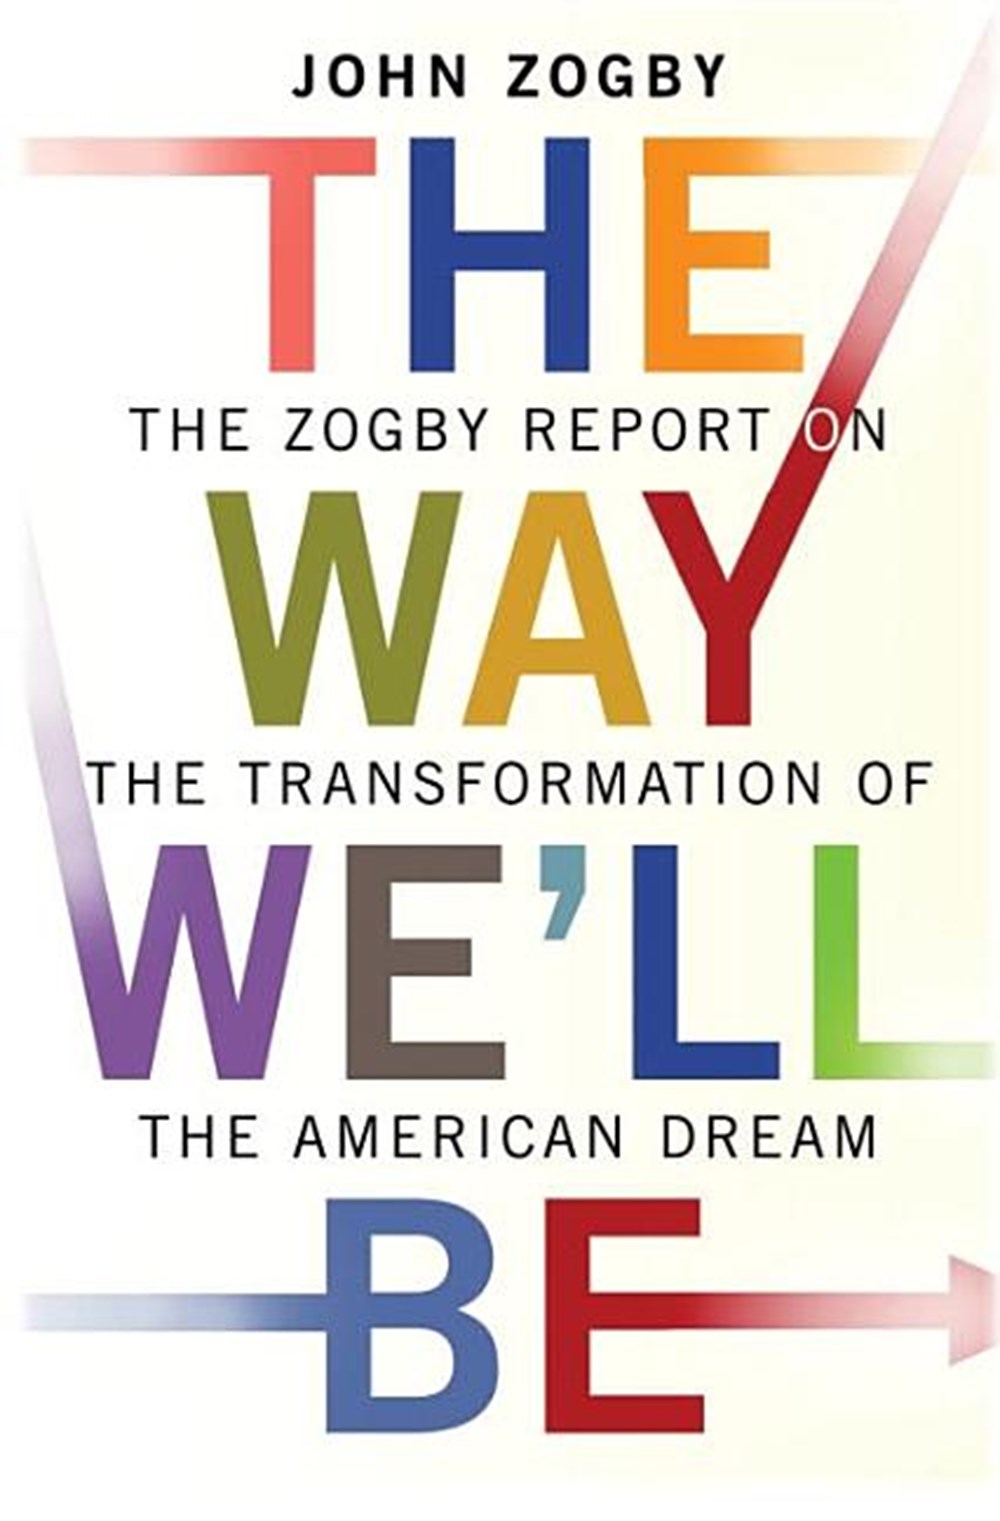 Way We'll Be: The Zogby Report on the Transformation of the American Dream